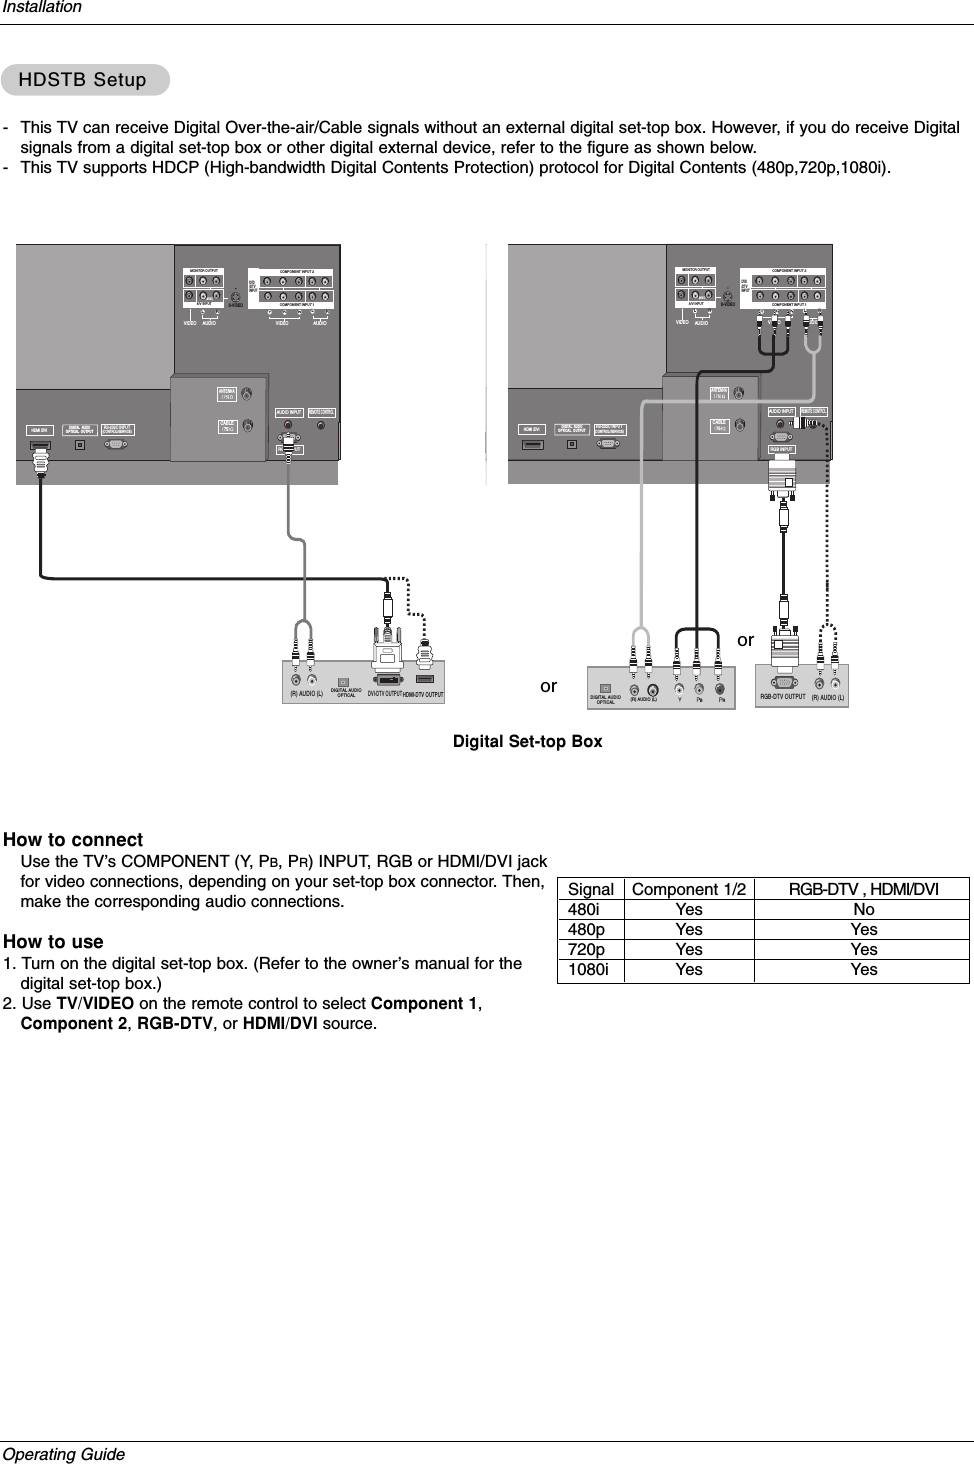 Operating GuideInstallation- This TV can receive Digital Over-the-air/Cable signals without an external digital set-top box. However, if you do receive Digitalsignals from a digital set-top box or other digital external device, refer to the figure as shown below.- This TV supports HDCP (High-bandwidth Digital Contents Protection) protocol for Digital Contents (480p,720p,1080i).How to connectUse the TV’s COMPONENT (Y, PB, PR) INPUT, RGB or HDMI/DVI jackfor video connections, depending on your set-top box connector. Then,make the corresponding audio connections.How to use1. Turn on the digital set-top box. (Refer to the owner’s manual for thedigital set-top box.) 2. Use TV/VIDEO on the remote control to select Component 1,Component 2, RGB-DTV, or HDMI/DVI source.HDSTB SetupHDSTB SetupAC  IAUDI O RLVIDEO COMPONENT INPUT 1RL(MONO)COMPONENT INPUT 2MONITOR OUTPUTA/V INPUT VIDEO AUDI O S-VIDEODVD   /DTVINPUTAUDIO INPUTREMOTE CONTROLRGB INPUTANTENNA CABLE HDMI /DVIDIGITAL  AUDIO OPTICAL  OUTPUT (CONTROL/SERVICE)RS-232C INPUT(R) AUDIO (L)DVI-DTV OUTPUTDIGITAL AUDIOOPTICALHDMI-DTV OUTPUTAUDI O RLVIDEO COMPONENT INPUT 1RL(MONO)COMPONENT INPUT 2MONITOR OUTPUTA/V INPUT VIDEO AUDIO S-VIDEODVD   /DTVINPUTAUDIO INPUTREMOTE CONTROLRGB INPUTANTENNA CABLE HDMI /DVIDIGITAL  AUDIO OPTICAL  OUTPUT (CONTROL/SERVICE)RS-232C INPUT(R) AUDIO (L)RGB-DTV OUTPUTBR(R) AUDIO (L)DIGITAL AUDIOOPTICALDigital Set-top BoxorSignal480i480p720p1080iComponent 1/2YesYesYesYesRGB-DTV , HDMI/DVINoYesYesYesor